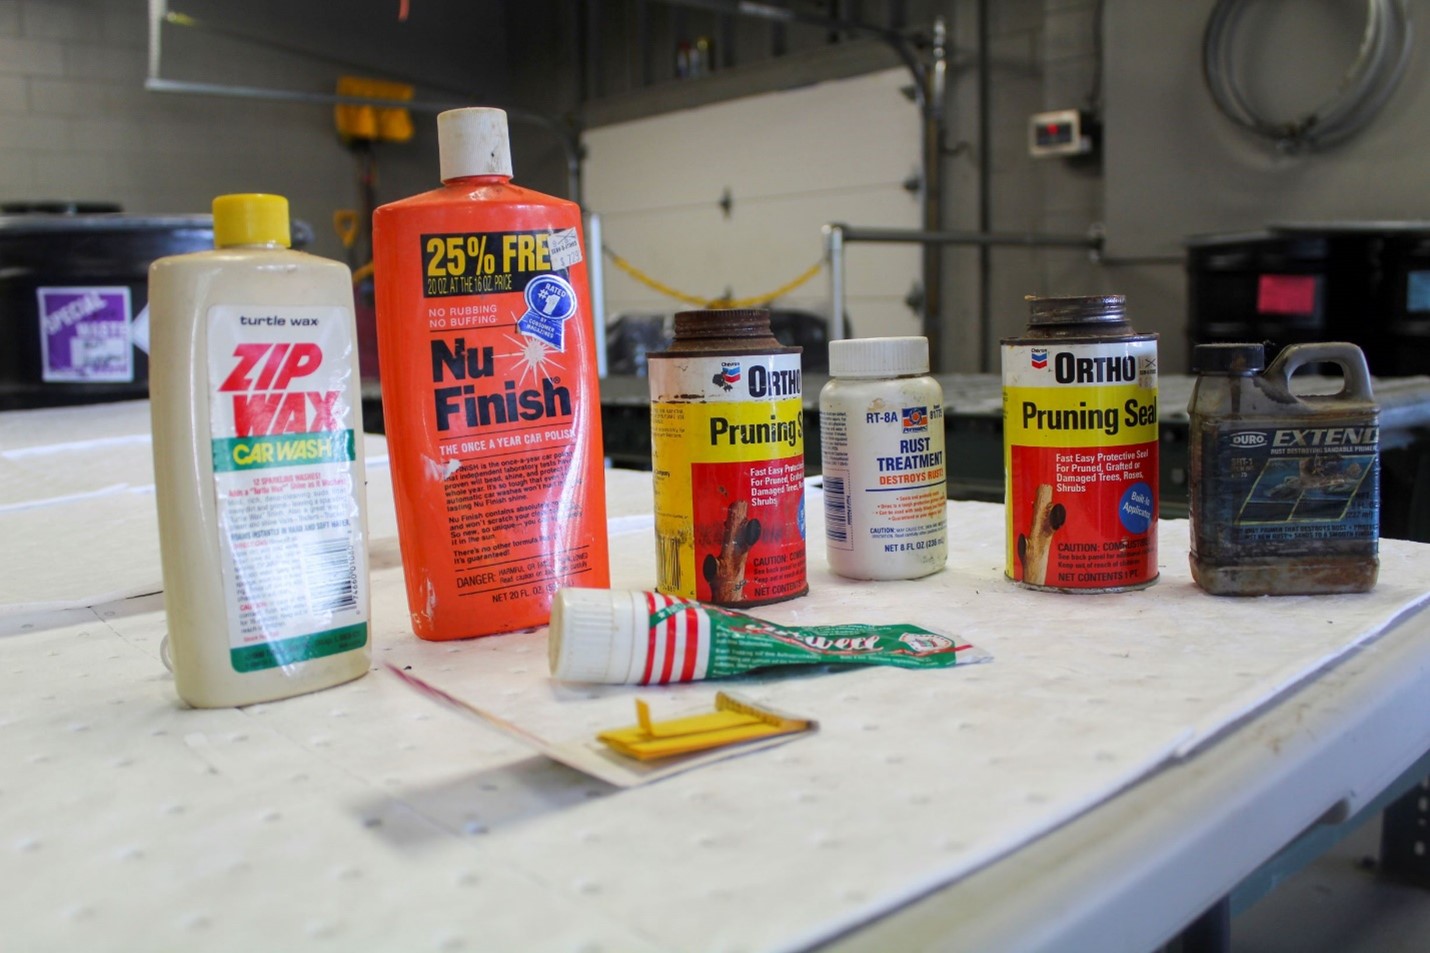 Bottles of waxes, sealants, and finishes lined up on a countertop